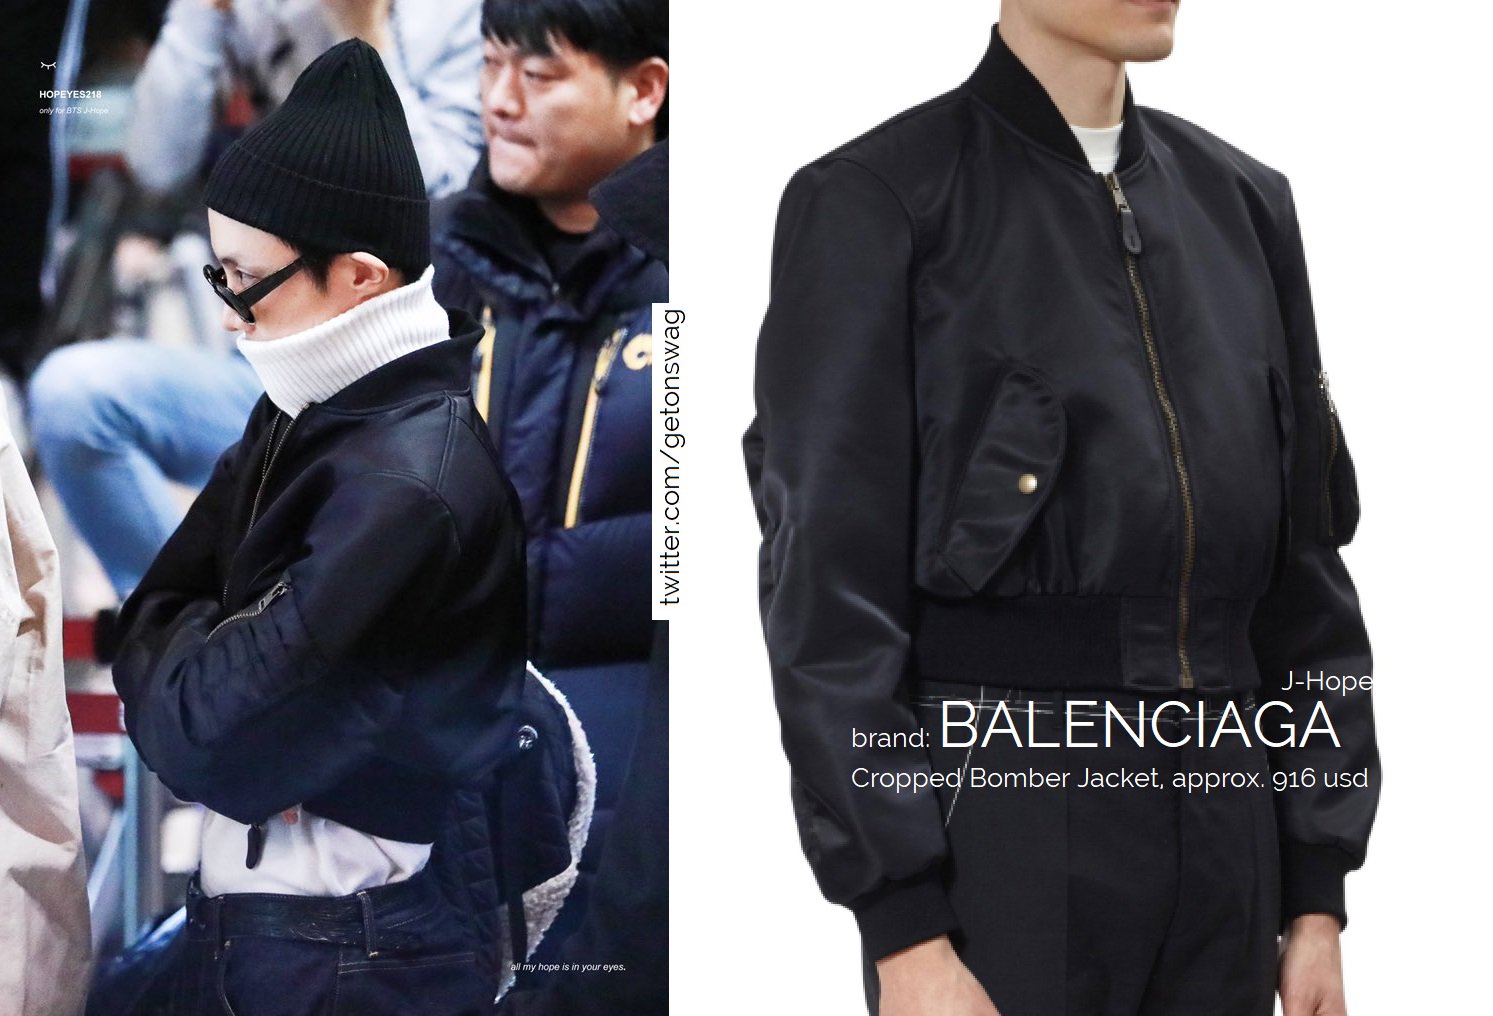 Beyond The Style ✼ Alex ✼ on Twitter: "BALENCIAGA Cropped Bomber Jacket  CHANEL resort 2019 turtleneck sweater JUNYA WATANABE COMME DES GARCONS -  jeans SUPREME beanie CHANEL Wool, Nylon, Calfskin &amp; Silver-Tone